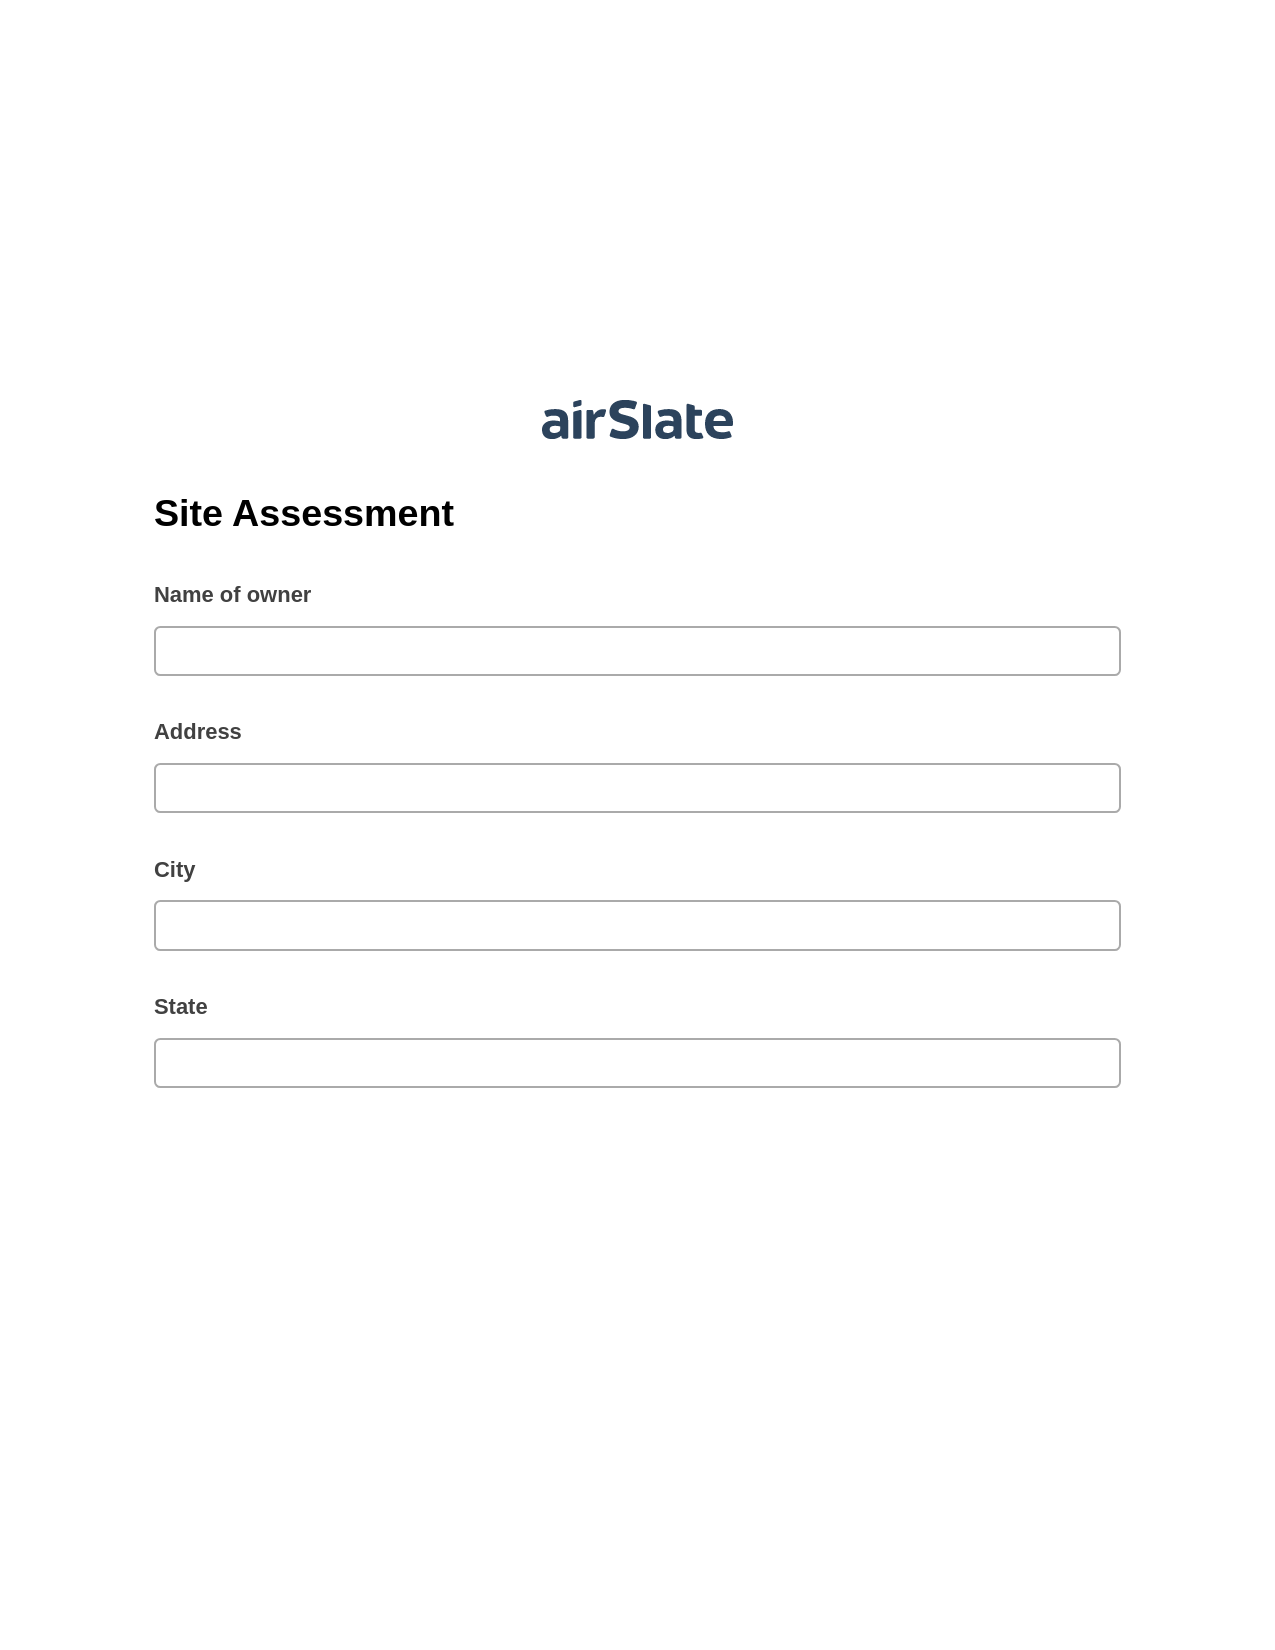 Multirole Site Assessment Pre-fill from CSV File Bot, Reminder Bot, Archive to SharePoint Folder Bot